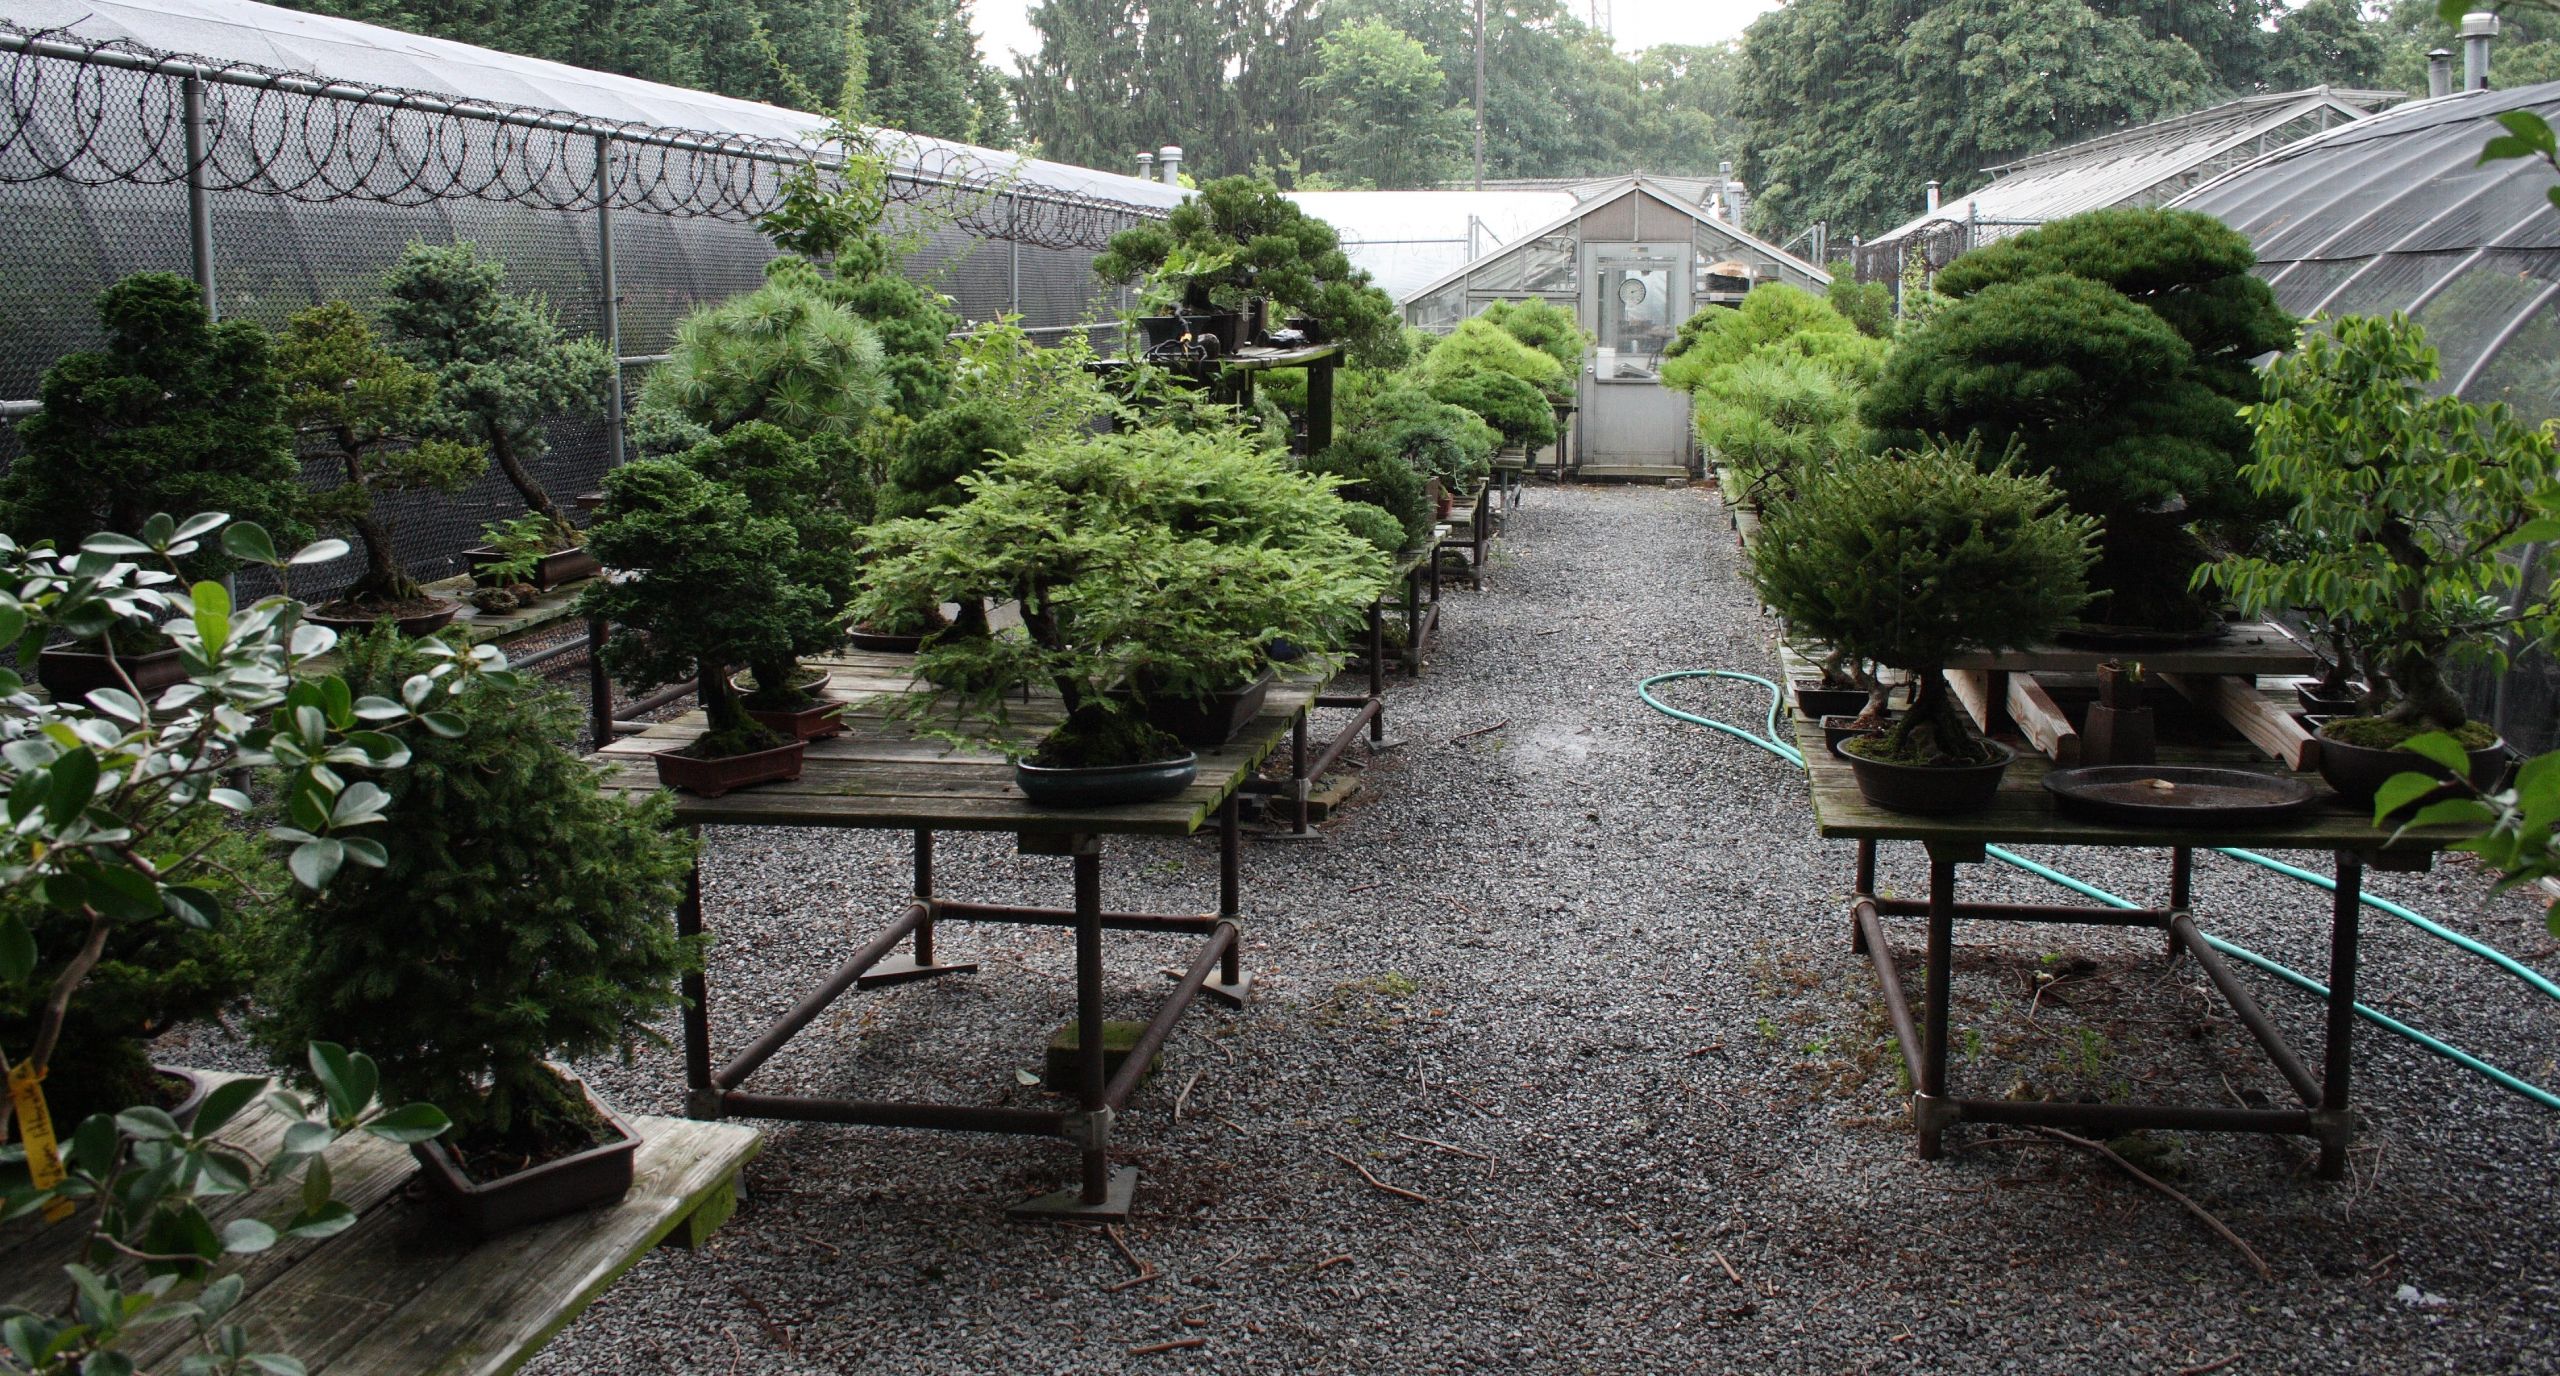 Storage area of the Brooklyn Botanic Garden bonsai collection August 2 2008